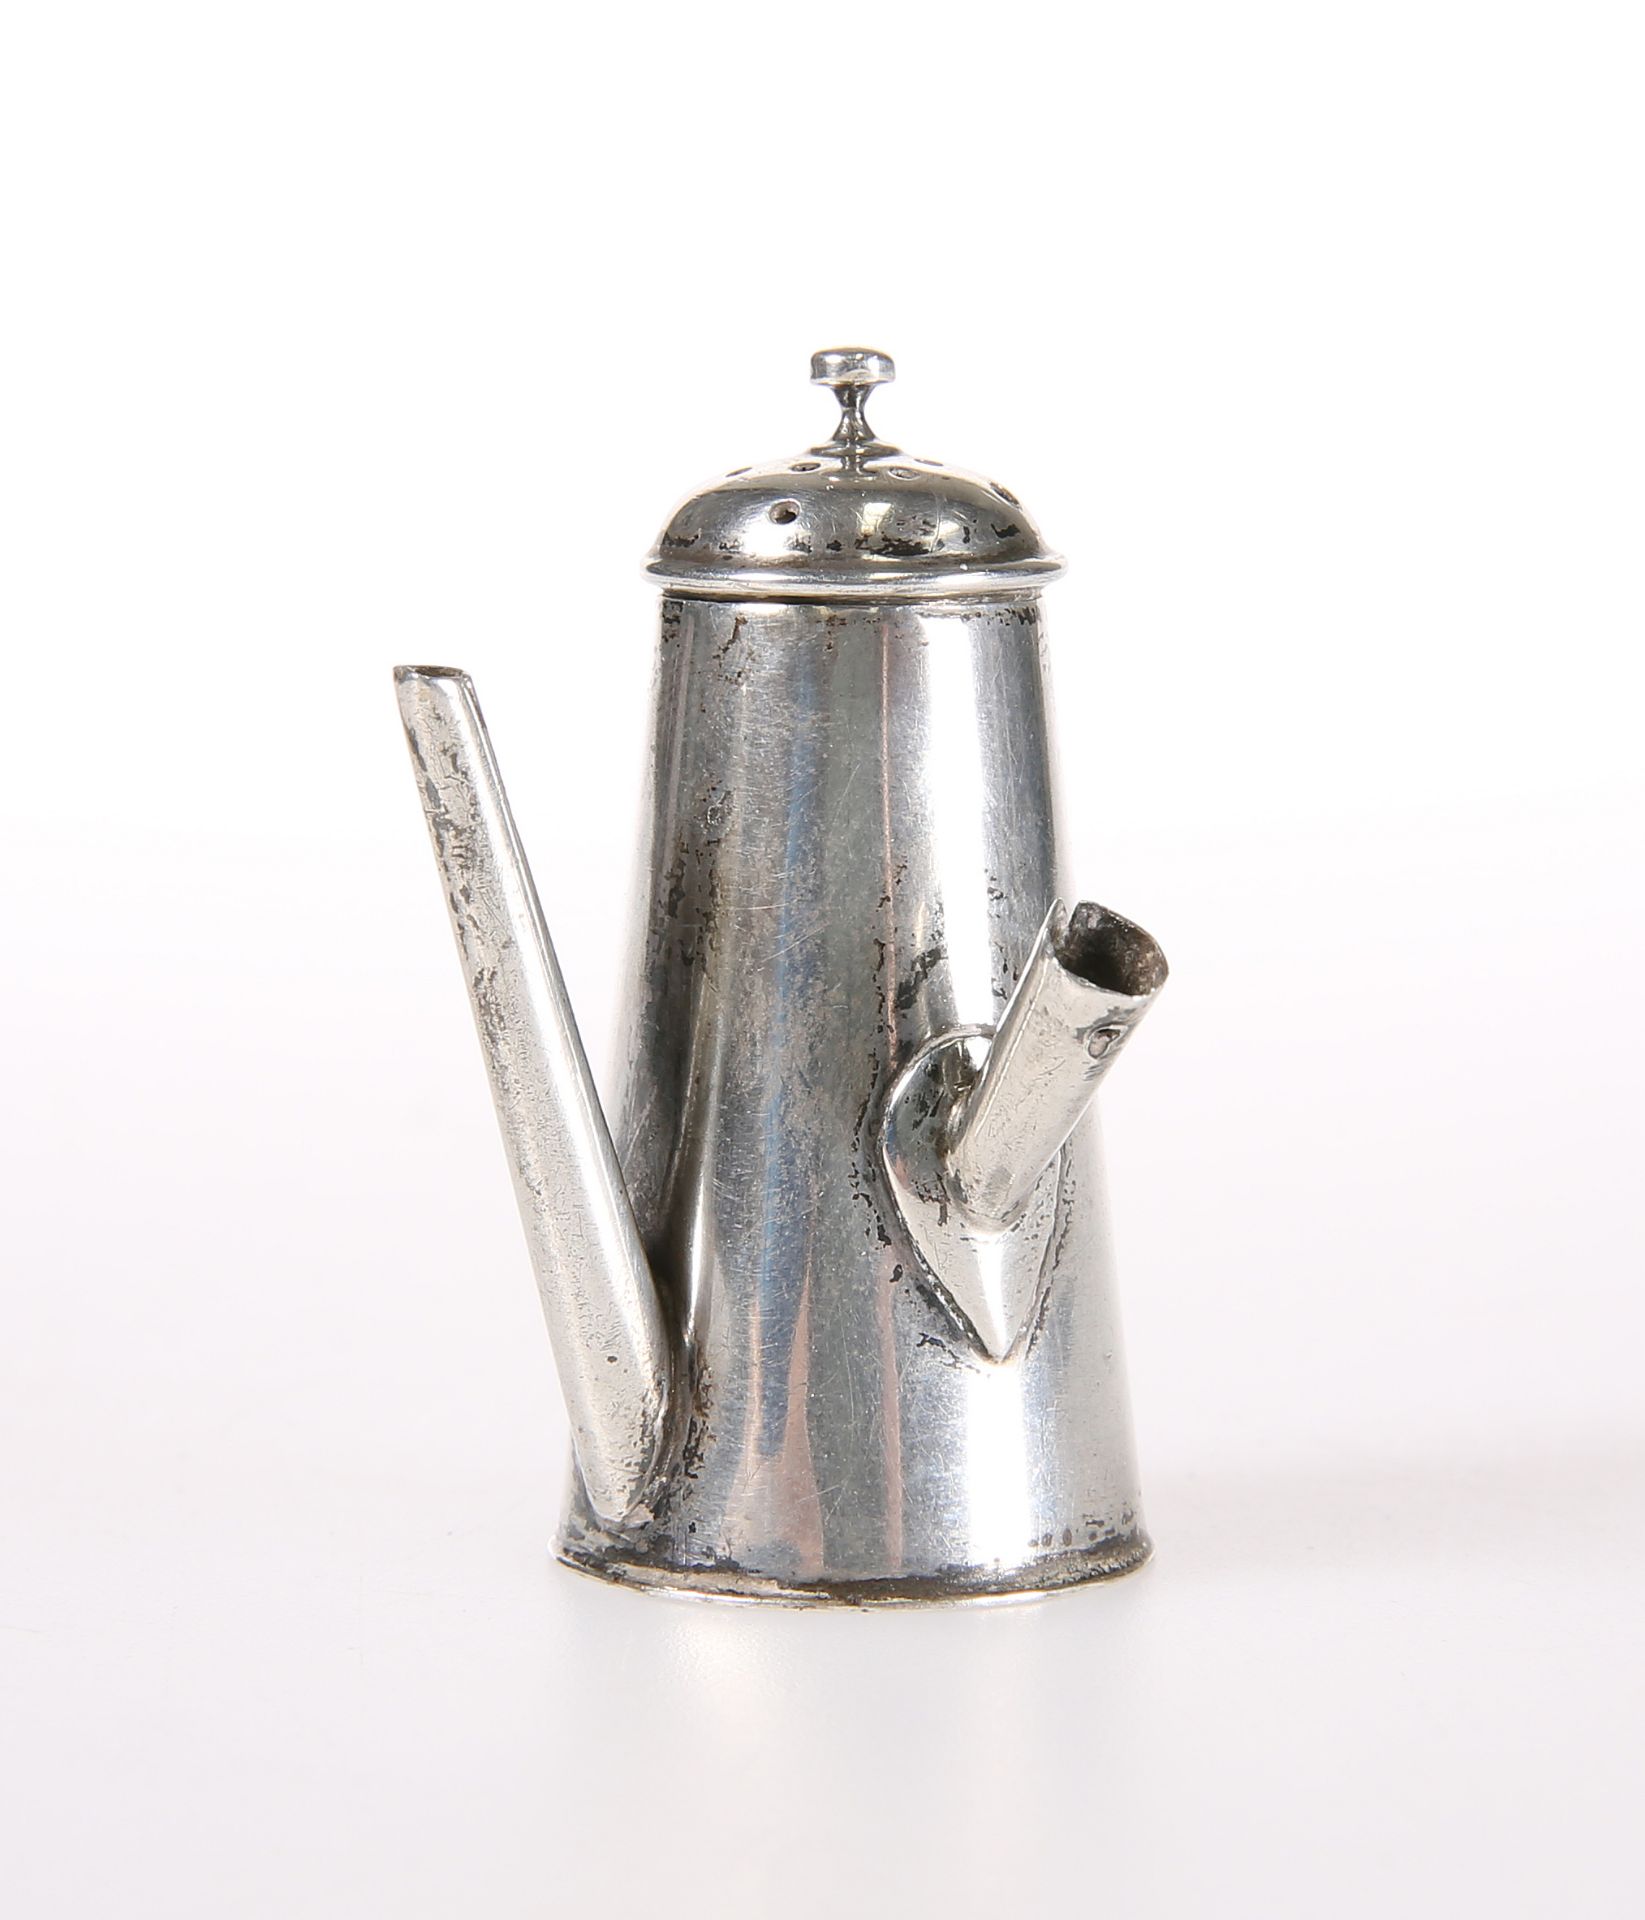 A LATE VICTORIAN SILVER MINIATURE (OR DOLLS) NOVELTY PEPPER POT